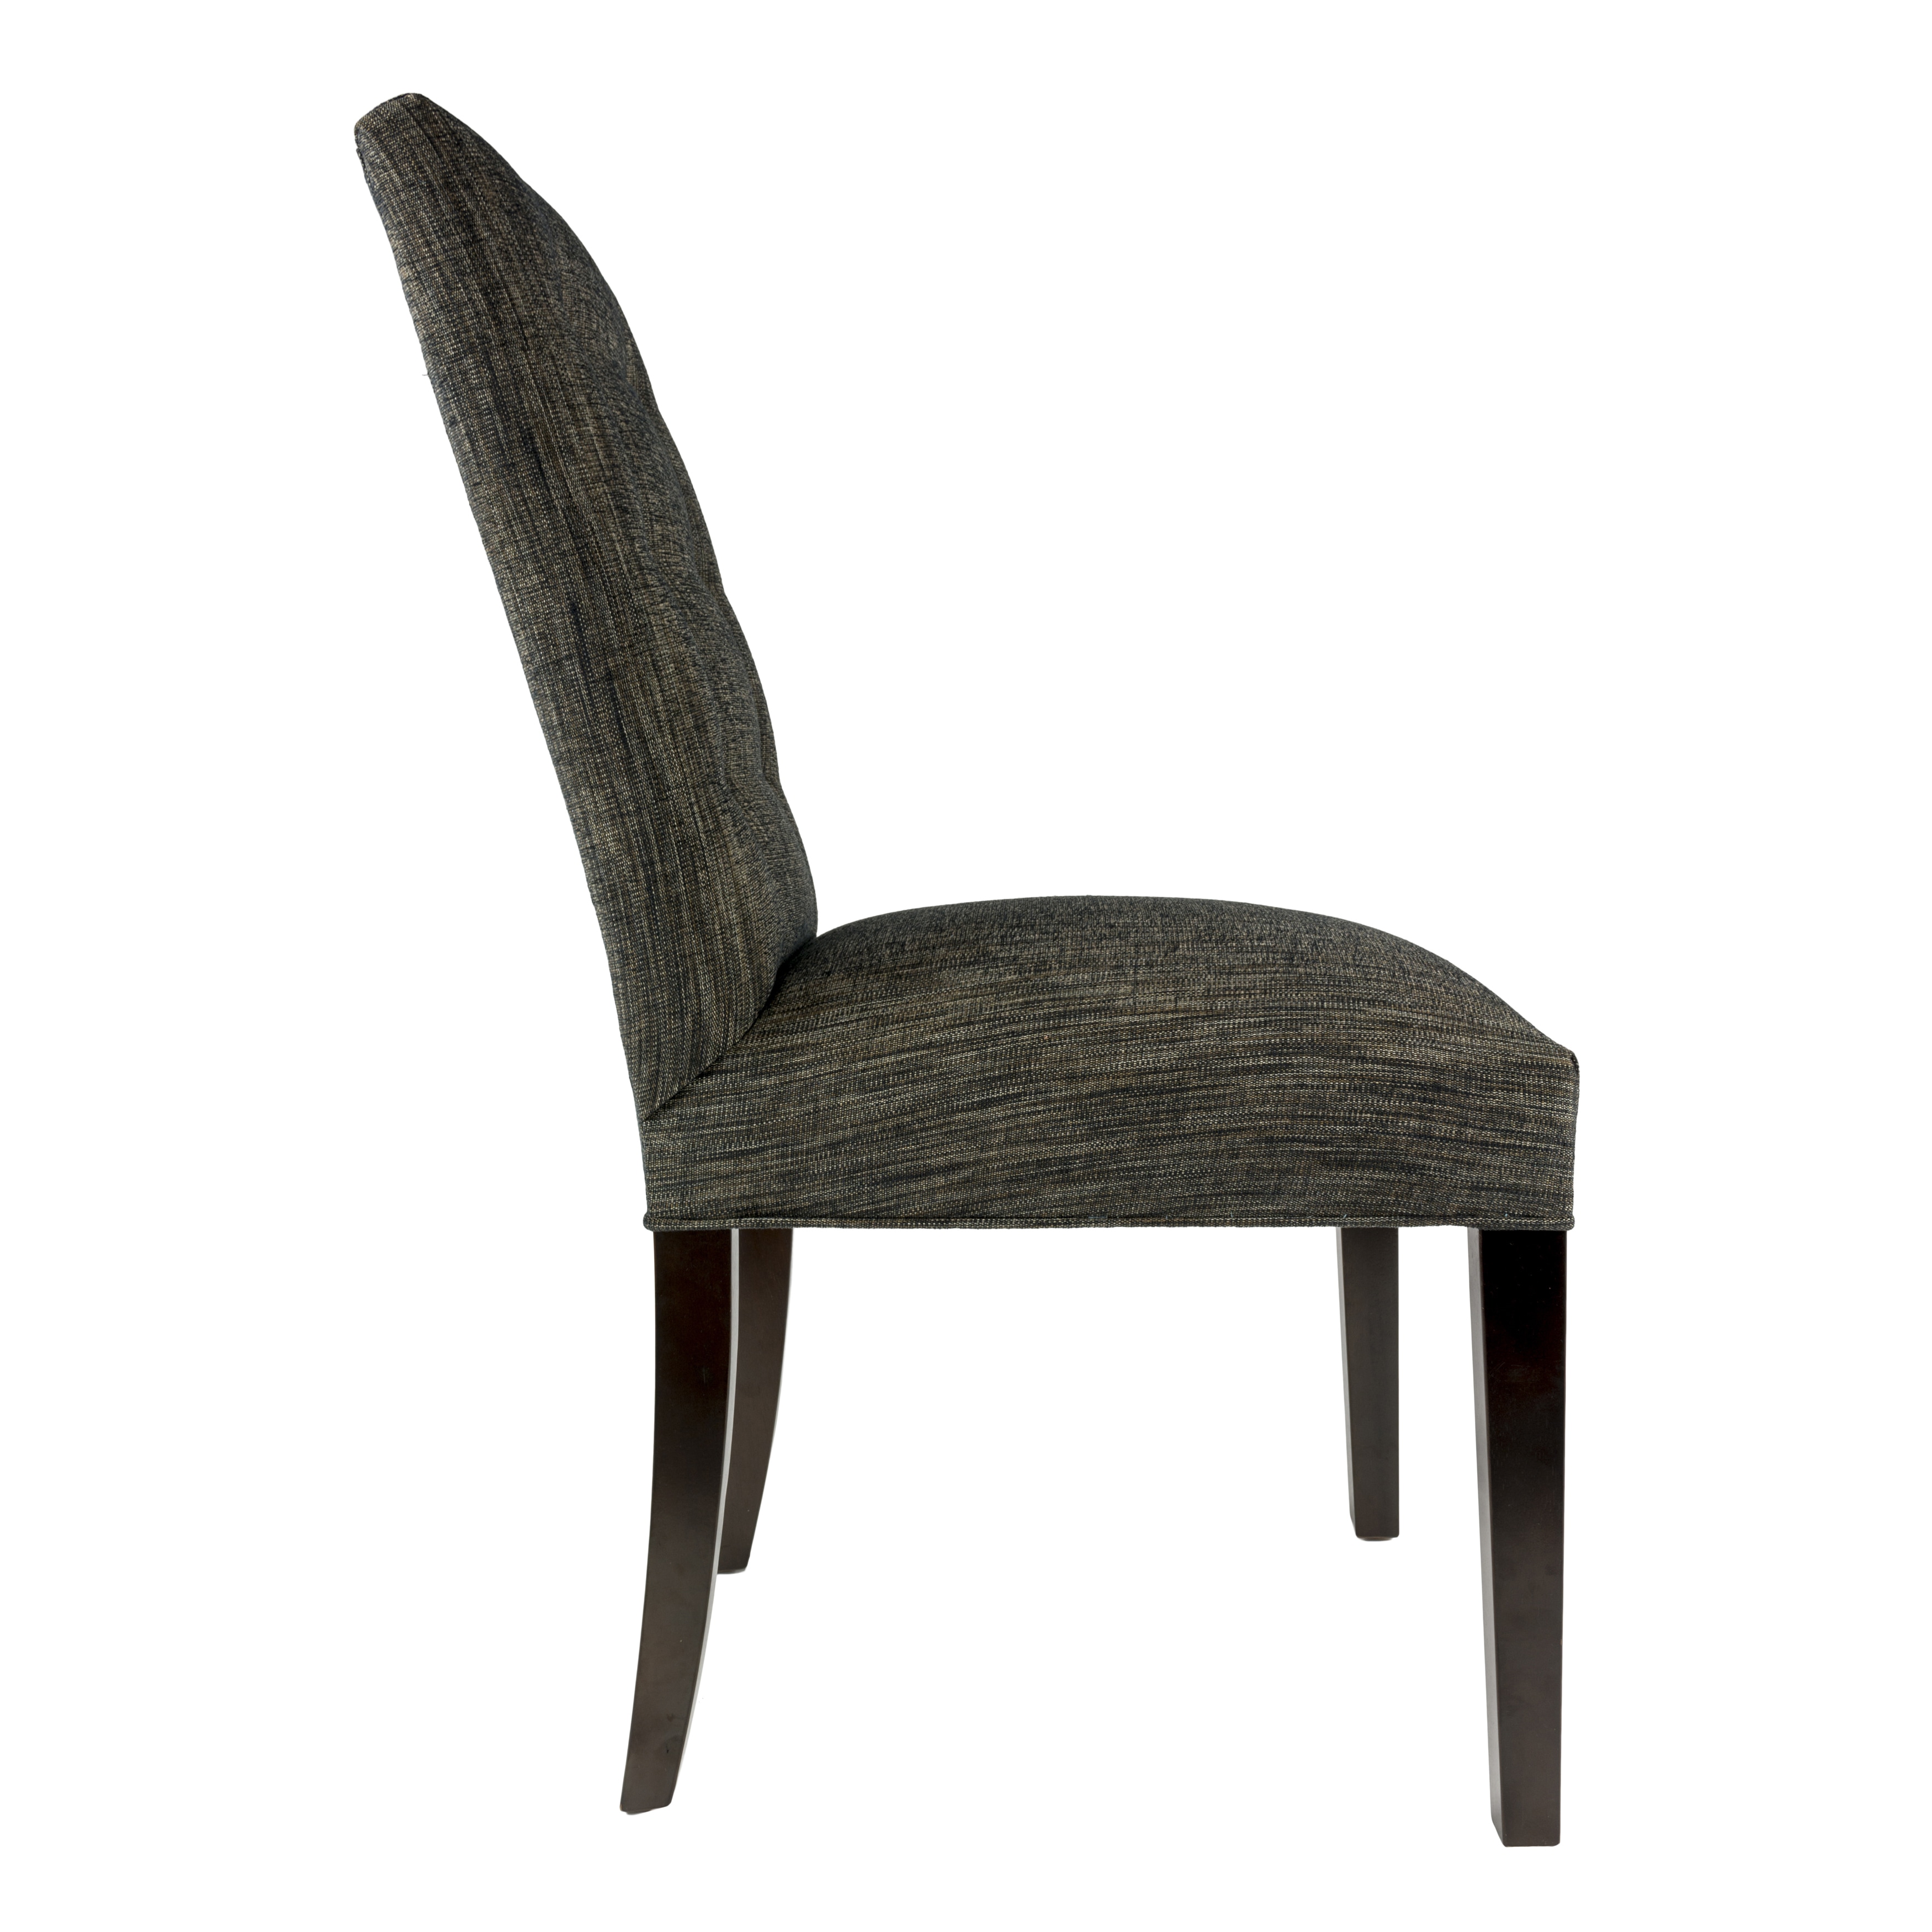 https://ak1.ostkcdn.com/images/products/16150856/KACEY-Straight-Back-Style-LUCKY-Upholstered-Fabric-Dining-Chair-with-Spring-Seating-Espresso-legs-Set-of-2-98f0ebab-4a55-4067-934c-1148bf5d0e26.jpg